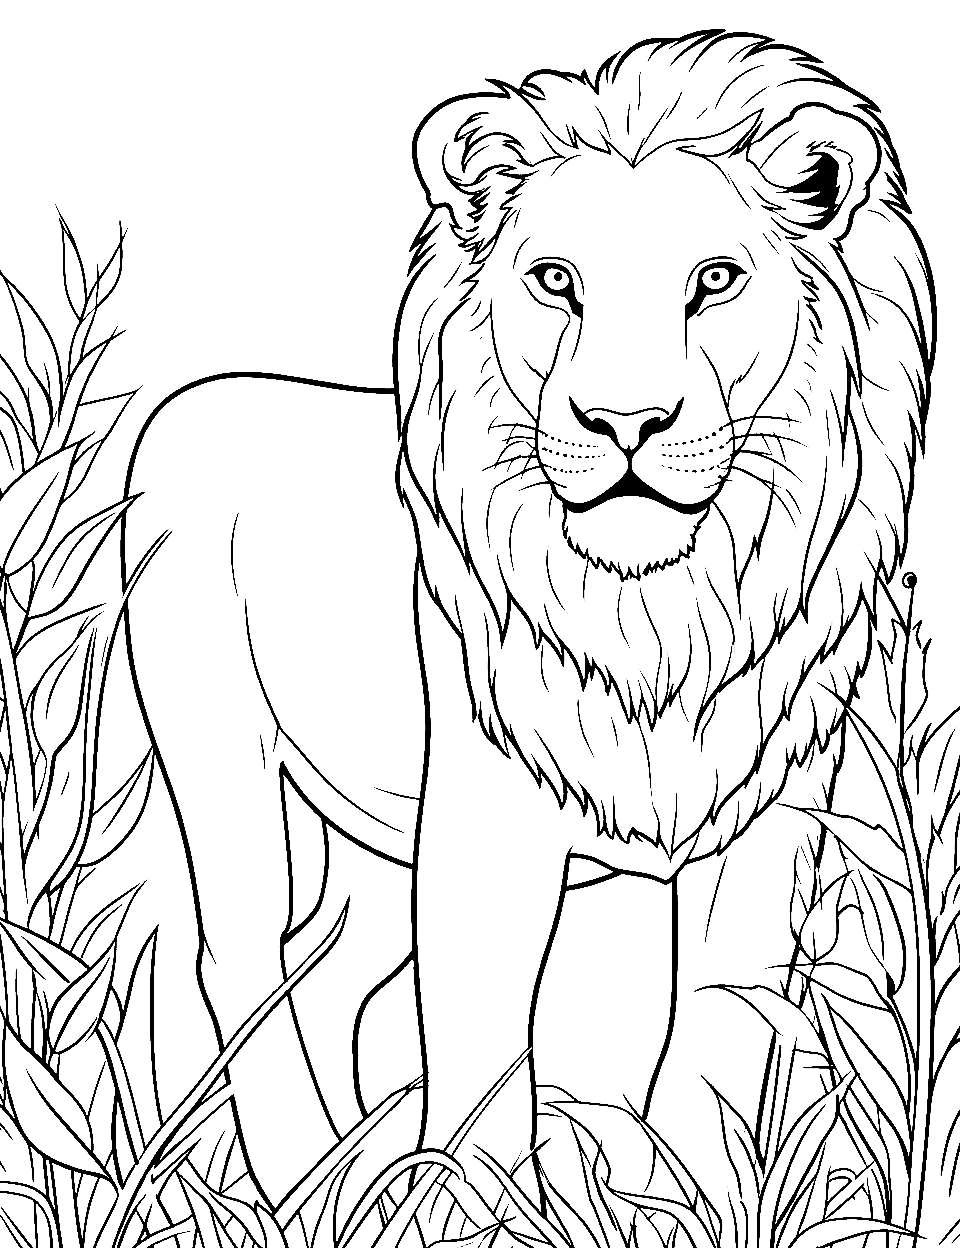 Lion Drawing in Nature Coloring Page - A lion amidst the grass.